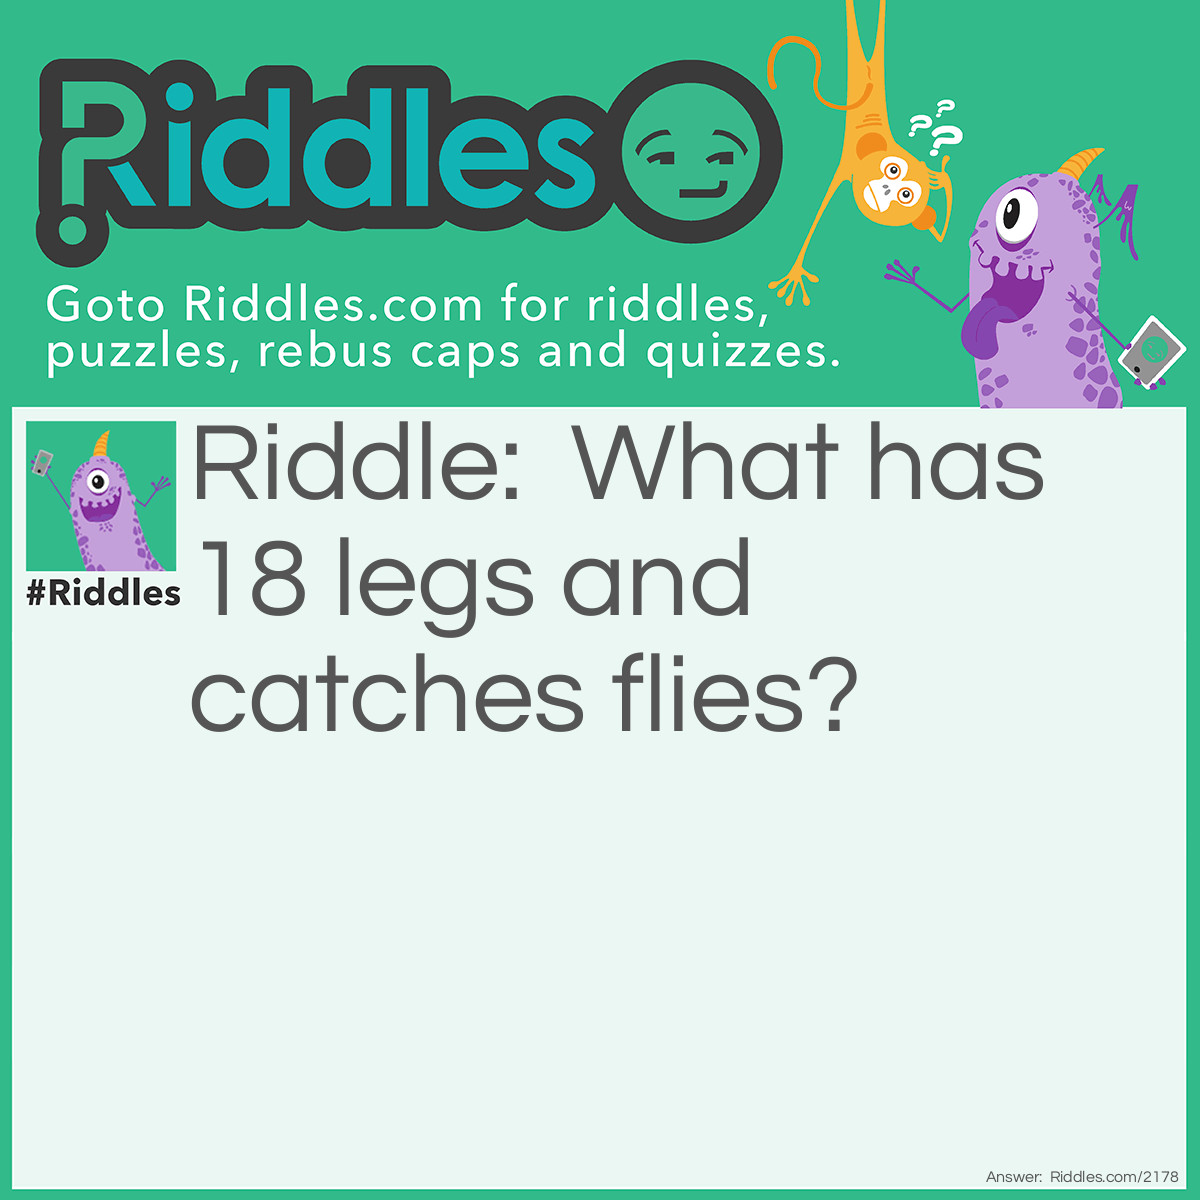 Riddle: What has 18 legs and catches flies? Answer: A baseball team.